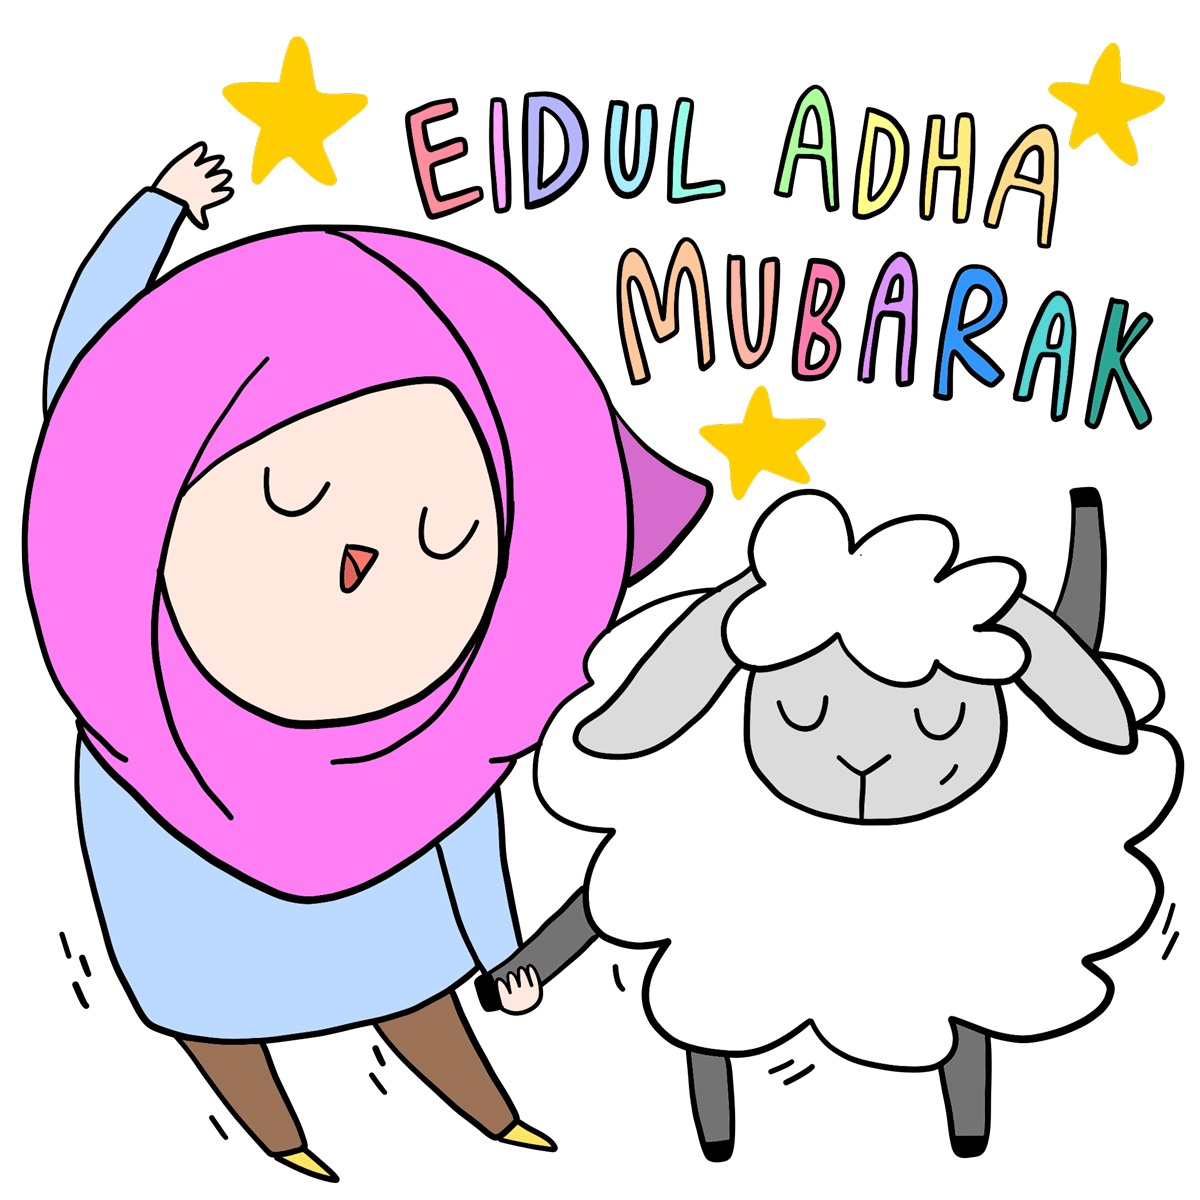 Happy Eid Mubarak Wishes, Quotes, Greetings, Messages, Images, Cards,  Photos, Status, Wallpaper, SMS, Pics and GIFs | - Times of India